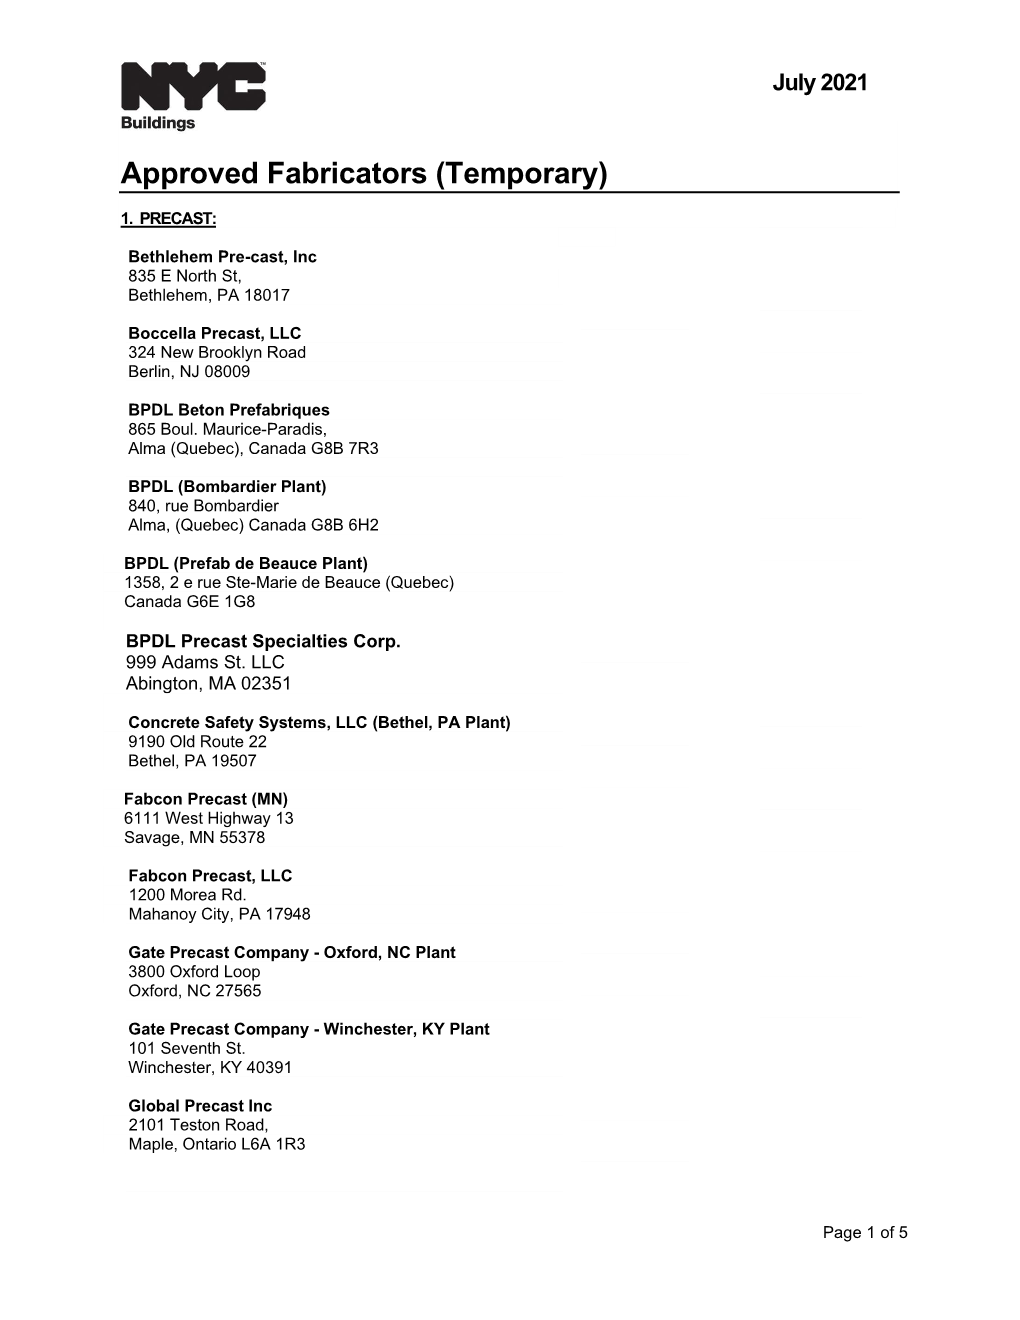 Approved Fabricators (Temporary)